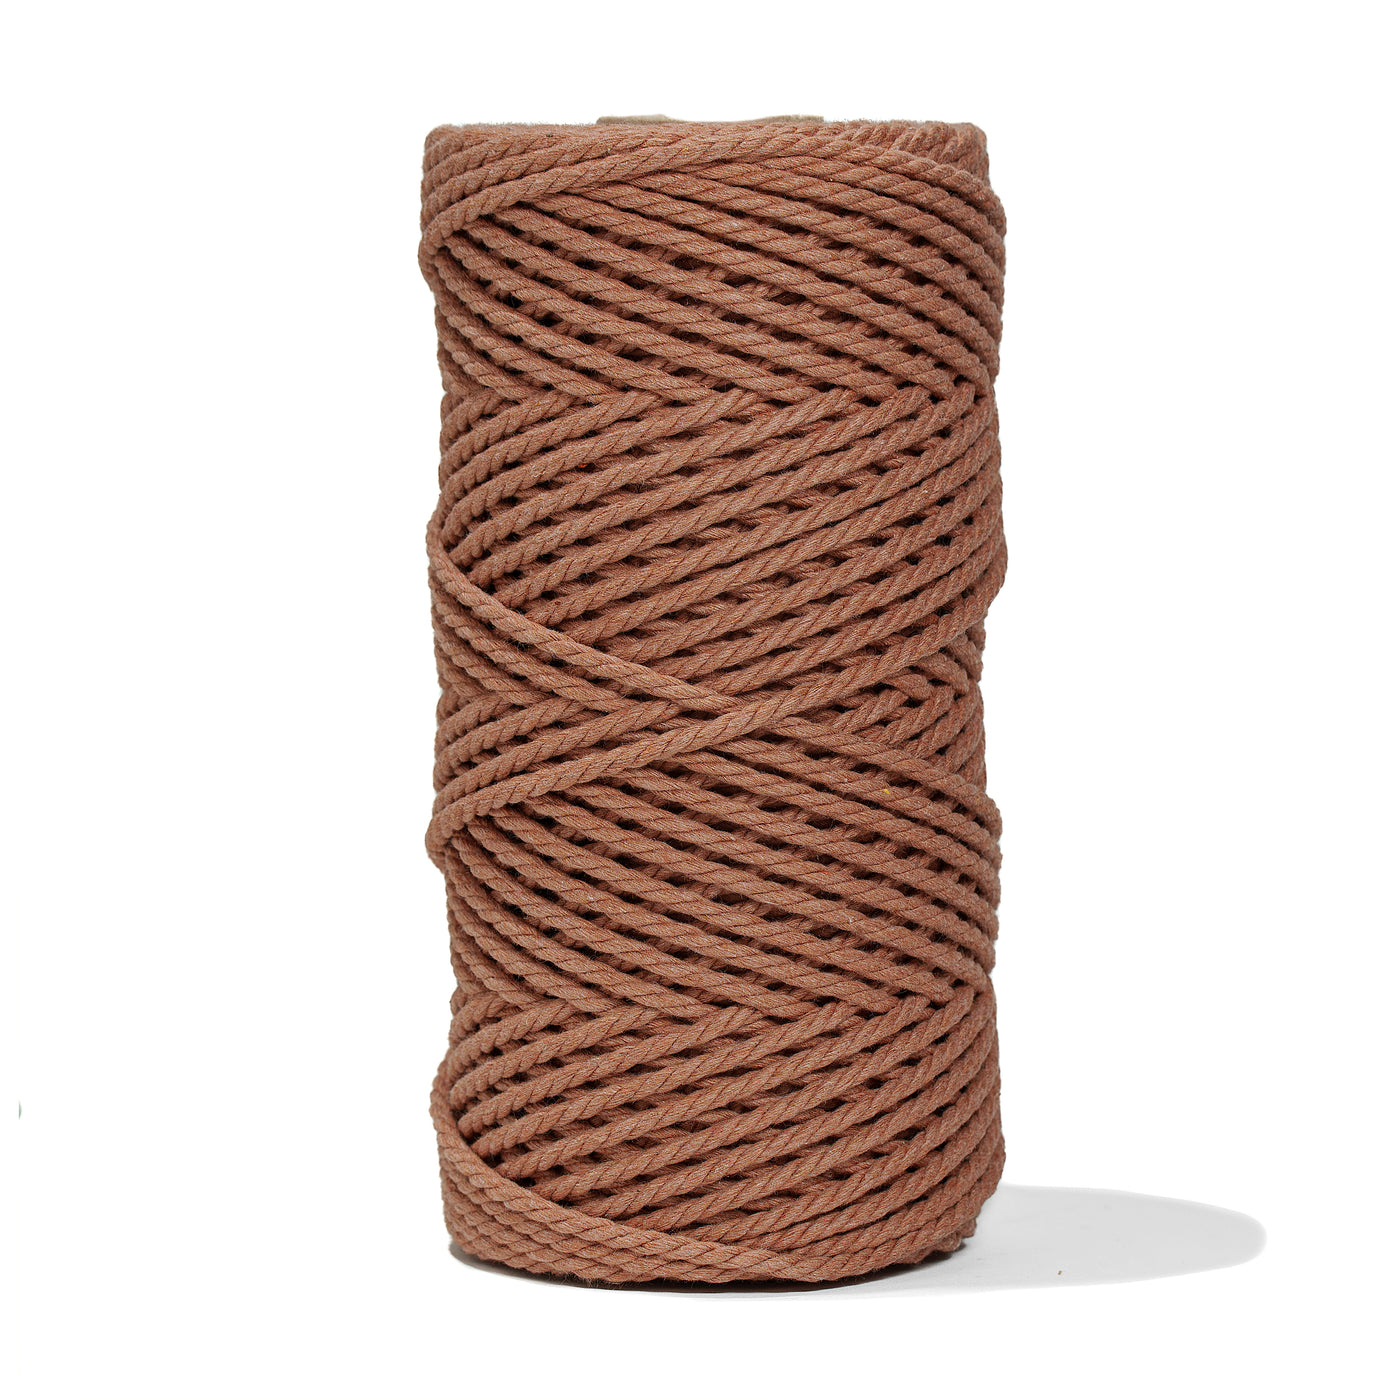 COTTON ROPE ZERO WASTE 3 MM - 3 PLY - CANYON COLOR